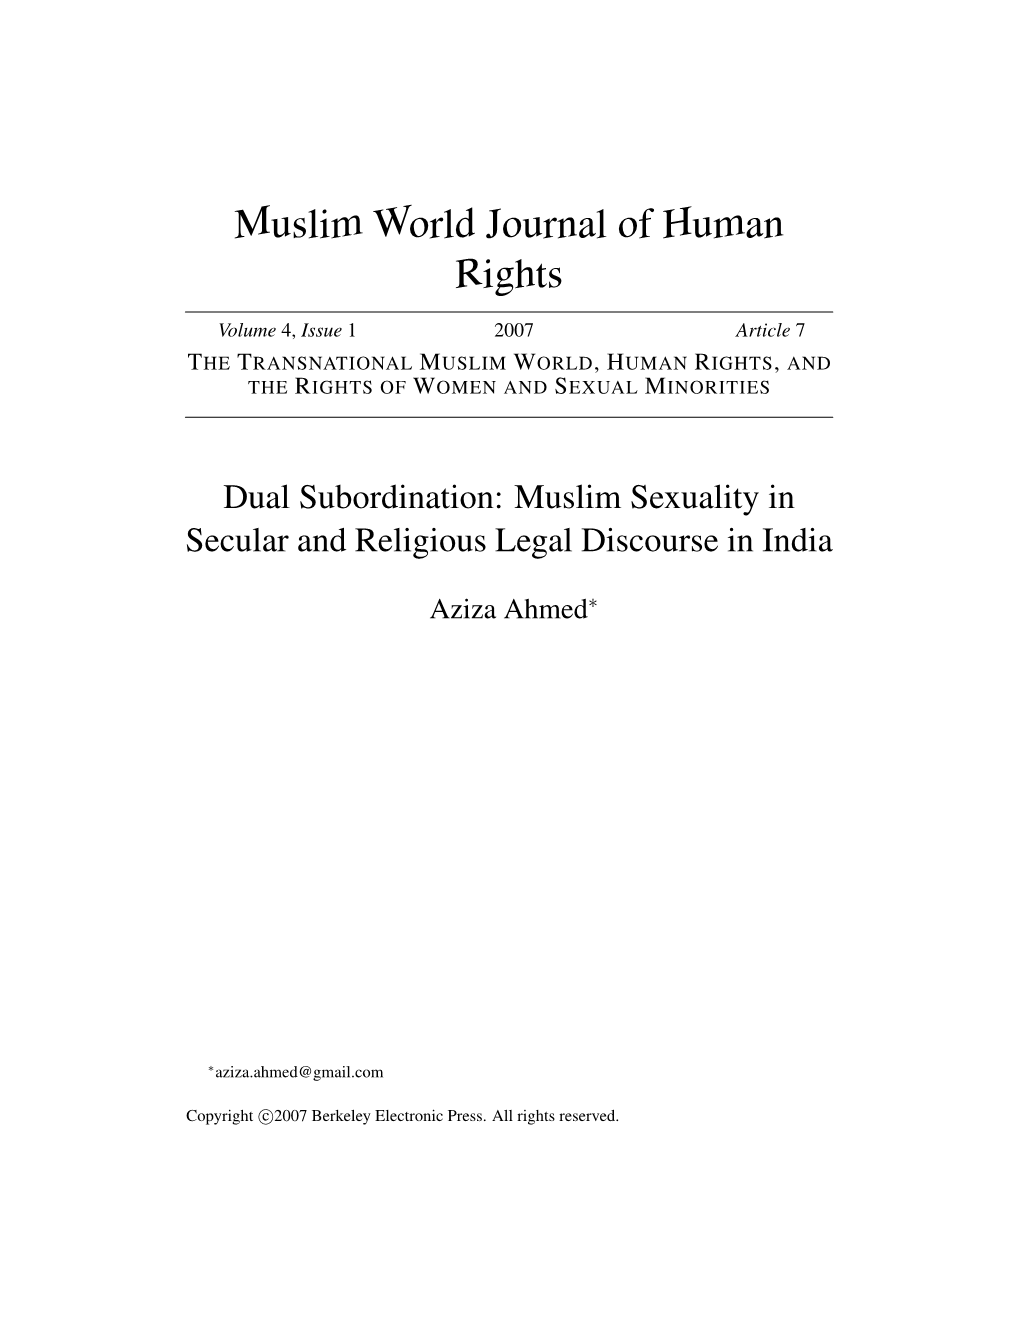 Muslim Sexuality in Secular and Religious Legal Discourse in India